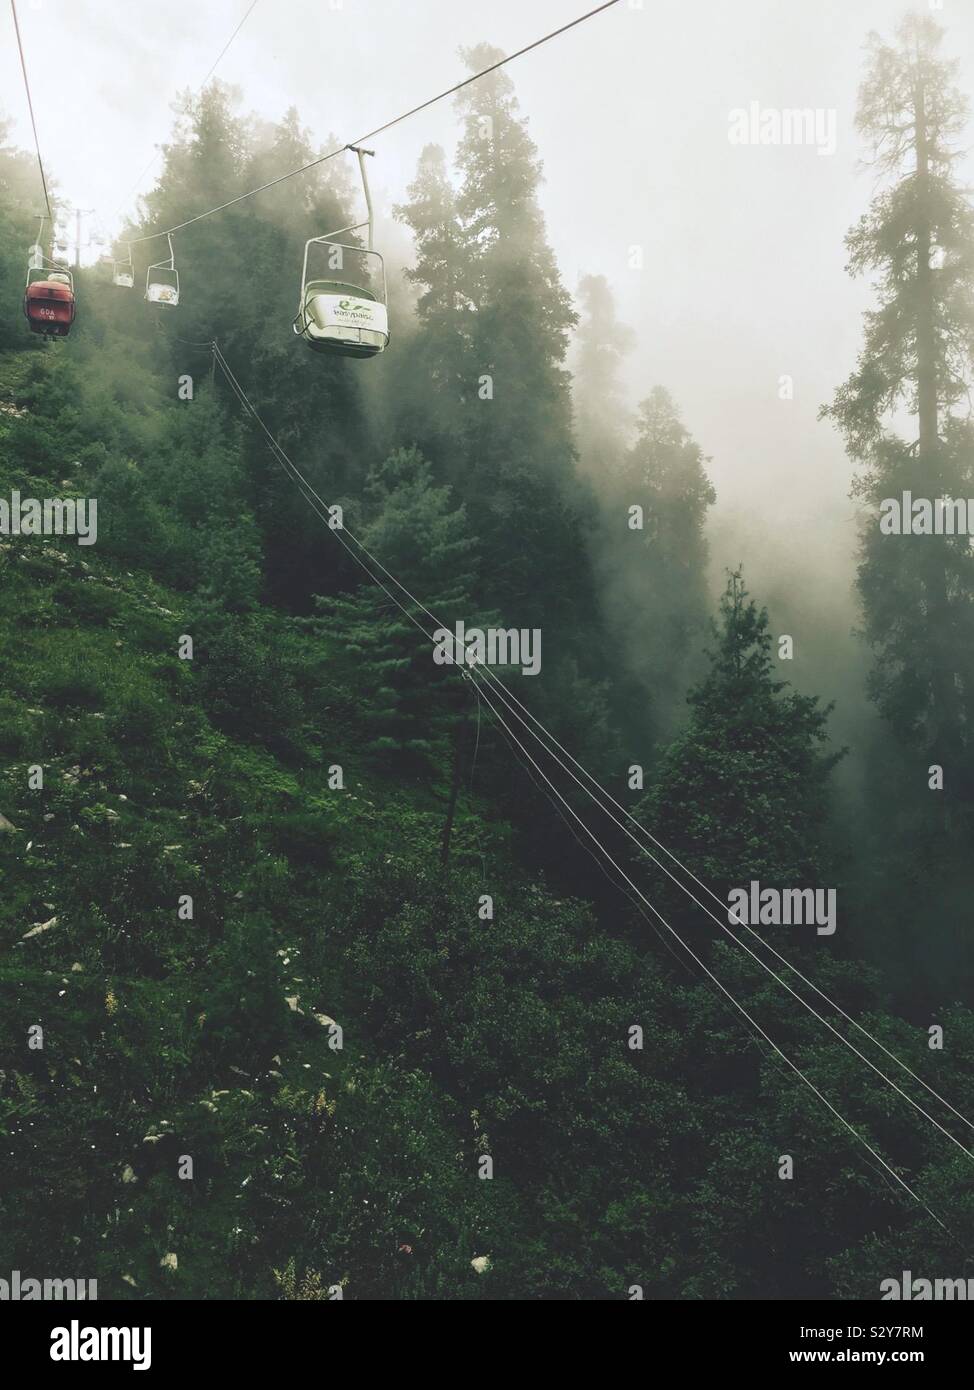 Cable car near Murree, Punjab, Pakistan. There is fog and a lot of greenery. Stock Photo